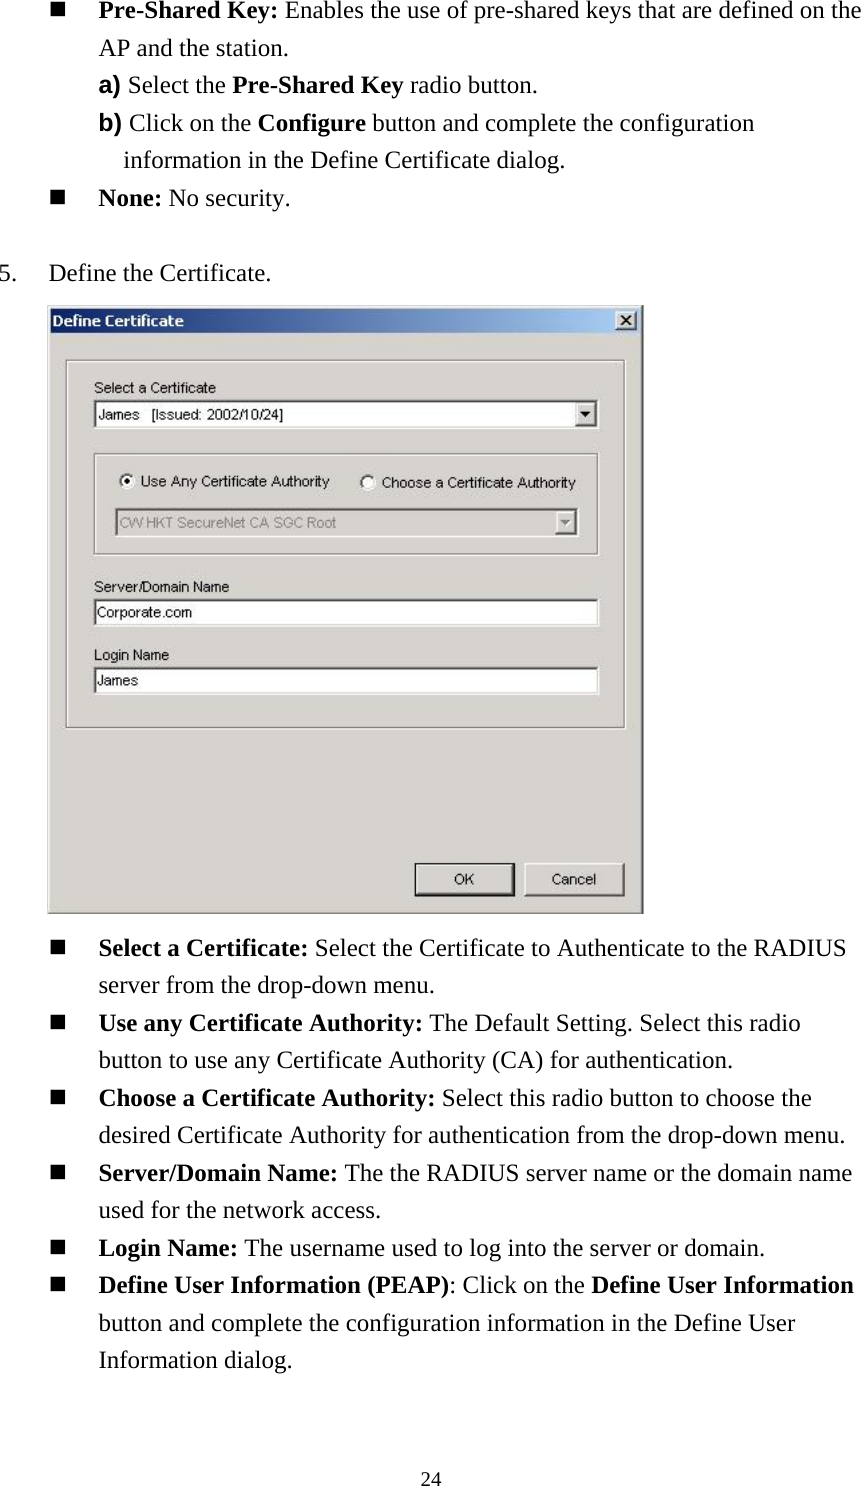  24  Pre-Shared Key: Enables the use of pre-shared keys that are defined on the AP and the station. a) Select the Pre-Shared Key radio button. b) Click on the Configure button and complete the configuration information in the Define Certificate dialog.   None: No security.  5.    Define the Certificate.         Select a Certificate: Select the Certificate to Authenticate to the RADIUS server from the drop-down menu.   Use any Certificate Authority: The Default Setting. Select this radio button to use any Certificate Authority (CA) for authentication.   Choose a Certificate Authority: Select this radio button to choose the desired Certificate Authority for authentication from the drop-down menu.   Server/Domain Name: The the RADIUS server name or the domain name used for the network access.   Login Name: The username used to log into the server or domain.   Define User Information (PEAP): Click on the Define User Information button and complete the configuration information in the Define User Information dialog.  